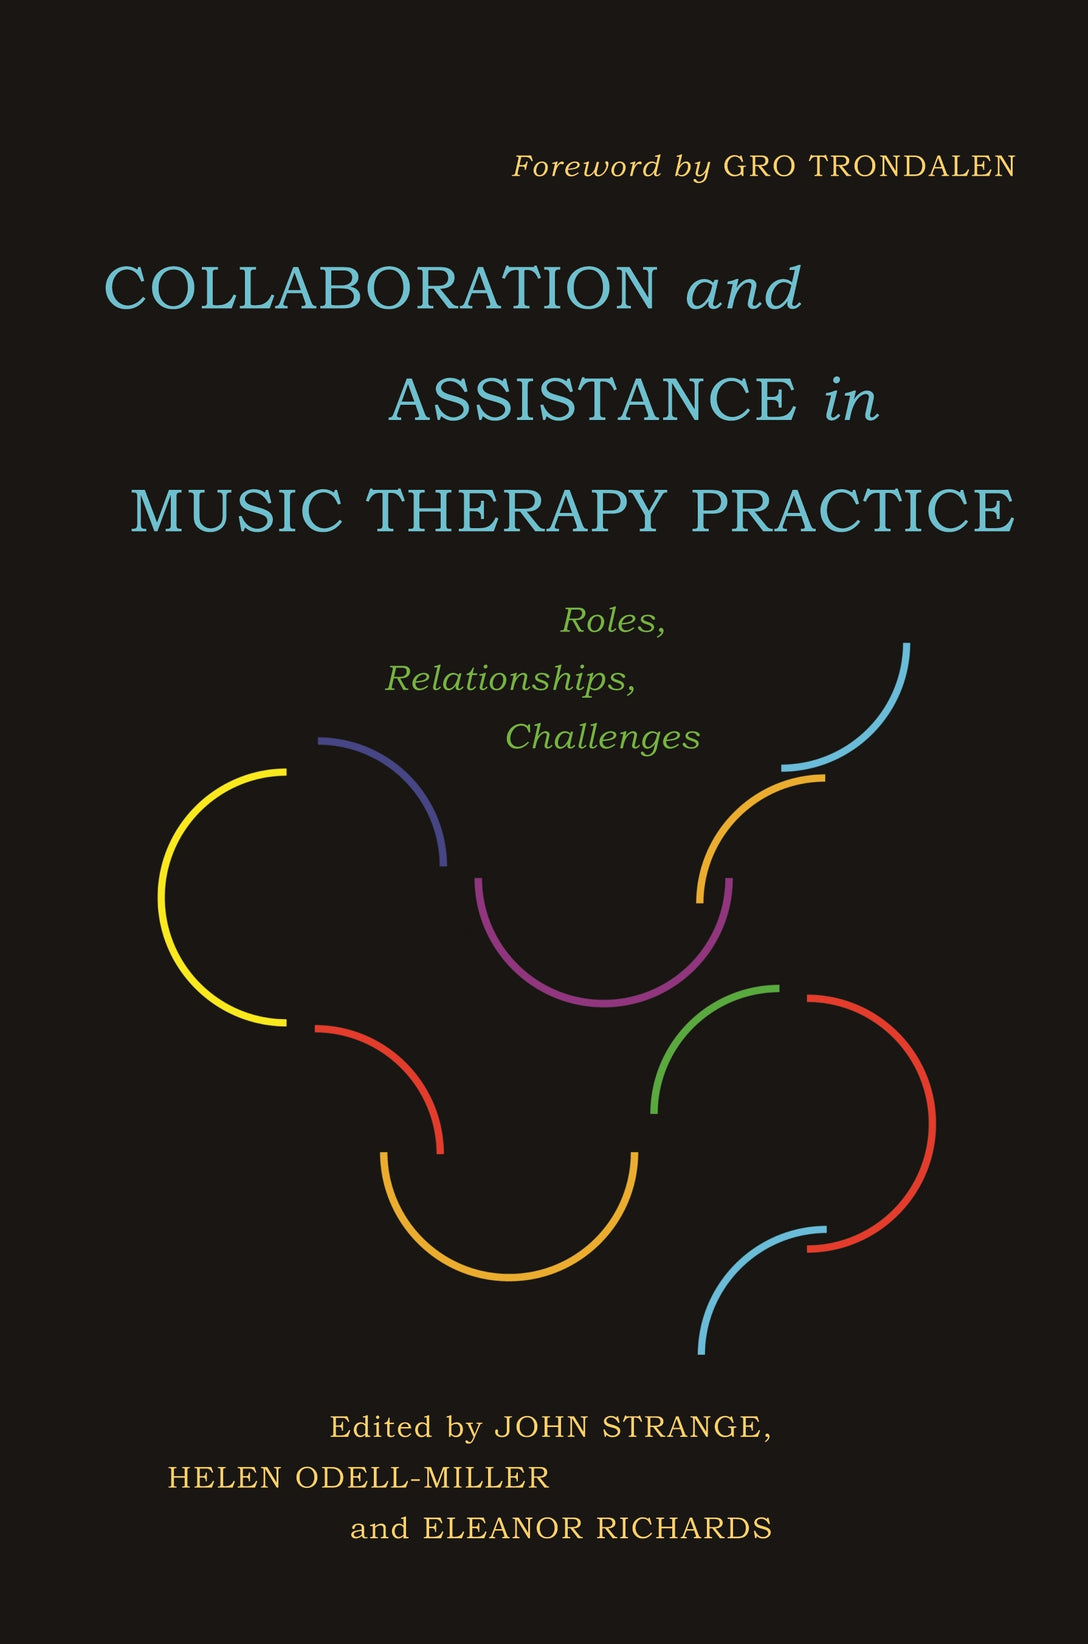 Collaboration and Assistance in Music Therapy Practice by No Author Listed, Helen Odell-Miller, Eleanor Richards, Gro Trondalen, John Strange